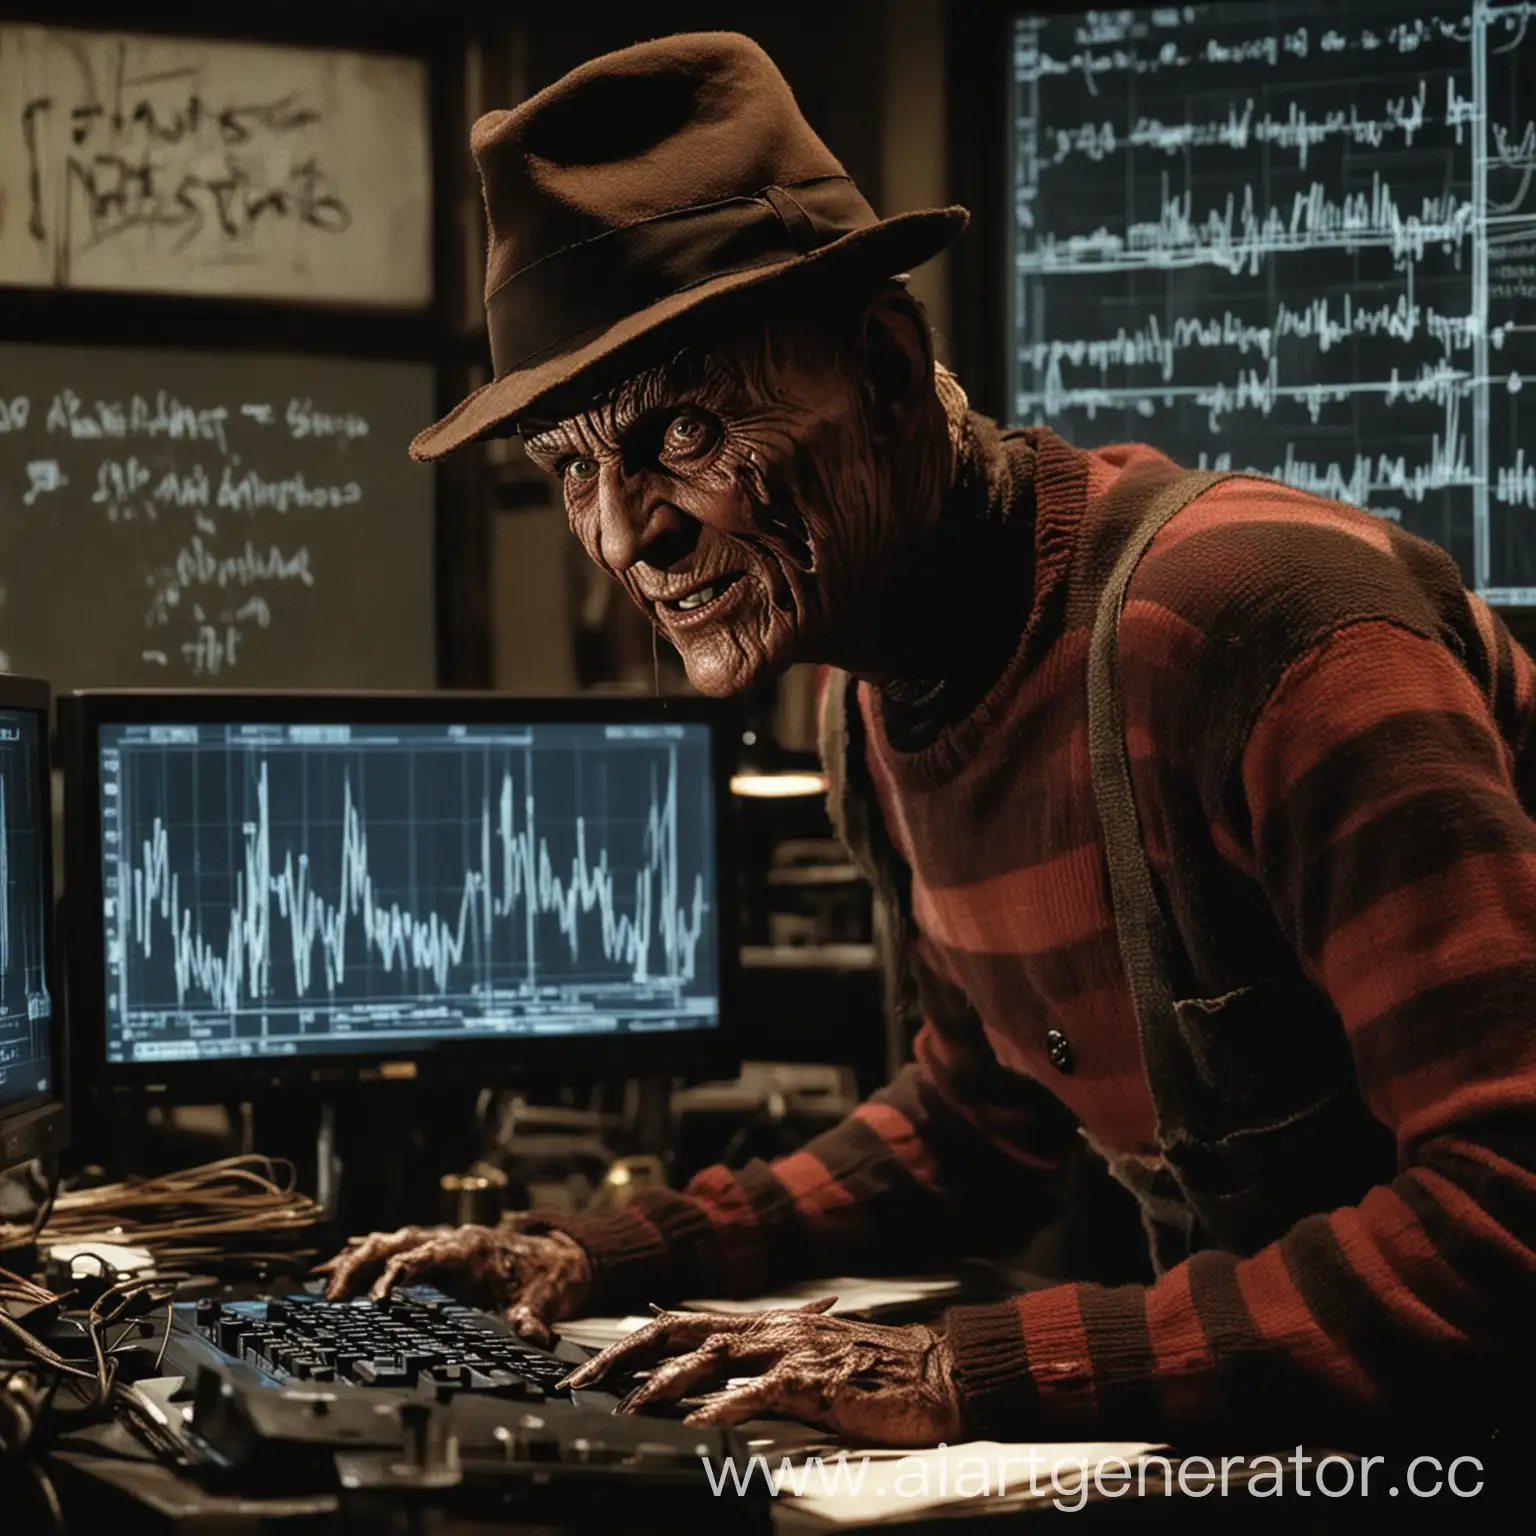 Freddy-Krueger-Monitoring-Computer-Graphs-with-Signature-Below